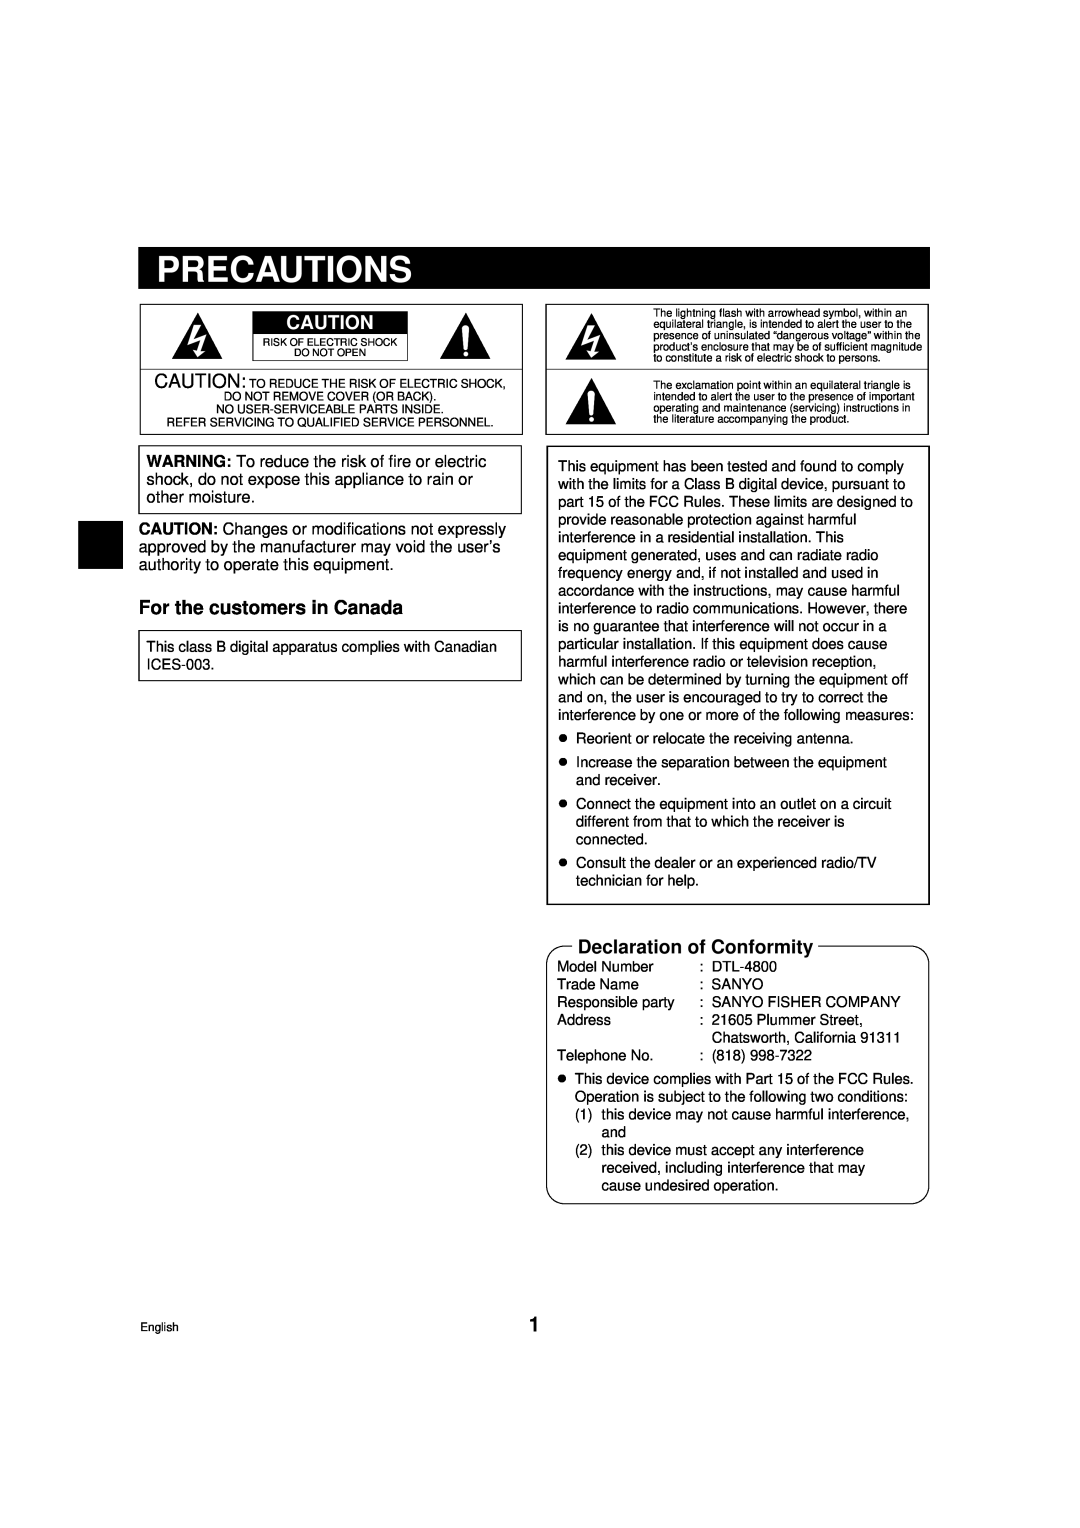 Sanyo DTL-4800, RD2QD/NA instruction manual Precautions, For the customers in Canada, Declaration of Conformity 